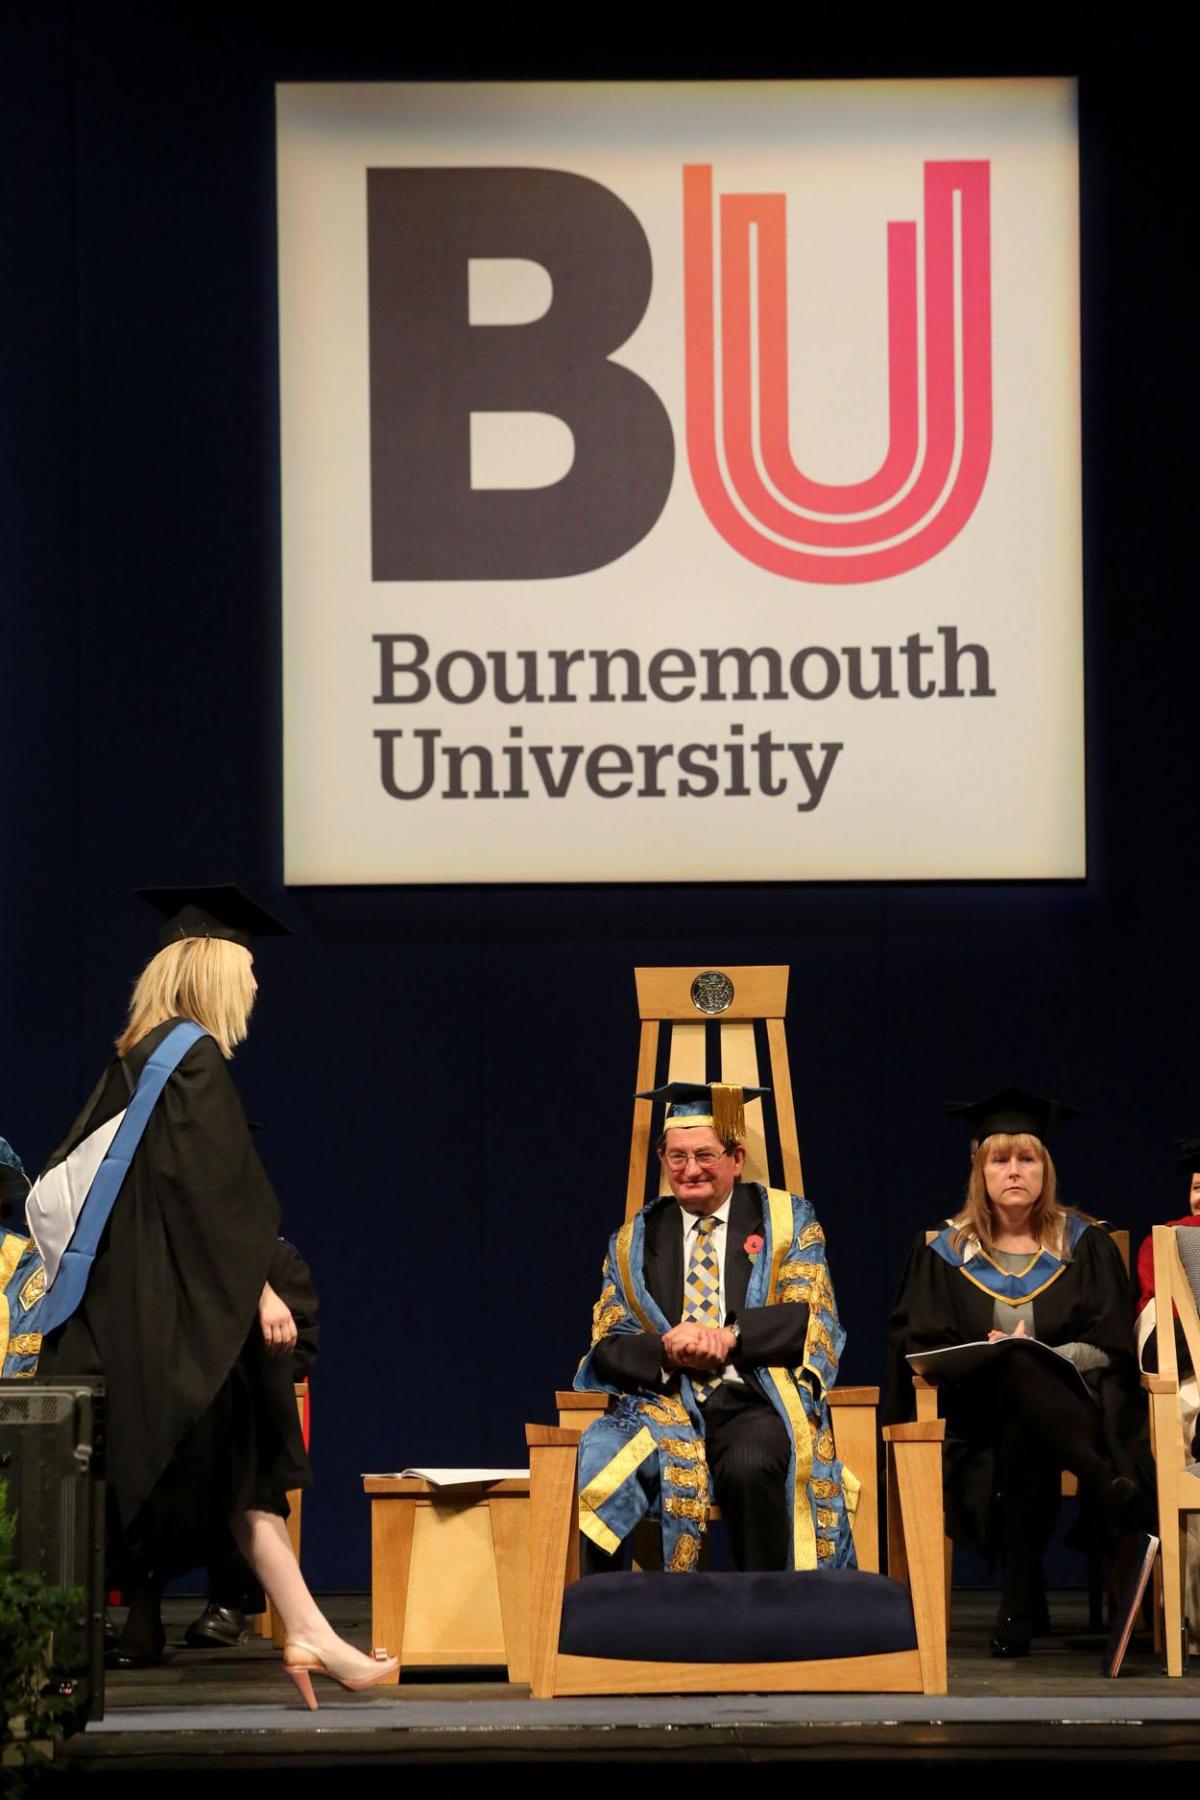 Students from the school of Health and Social Care graduate from Bournemouth University on 4th November 2014. Pictures by Corin Messer. 